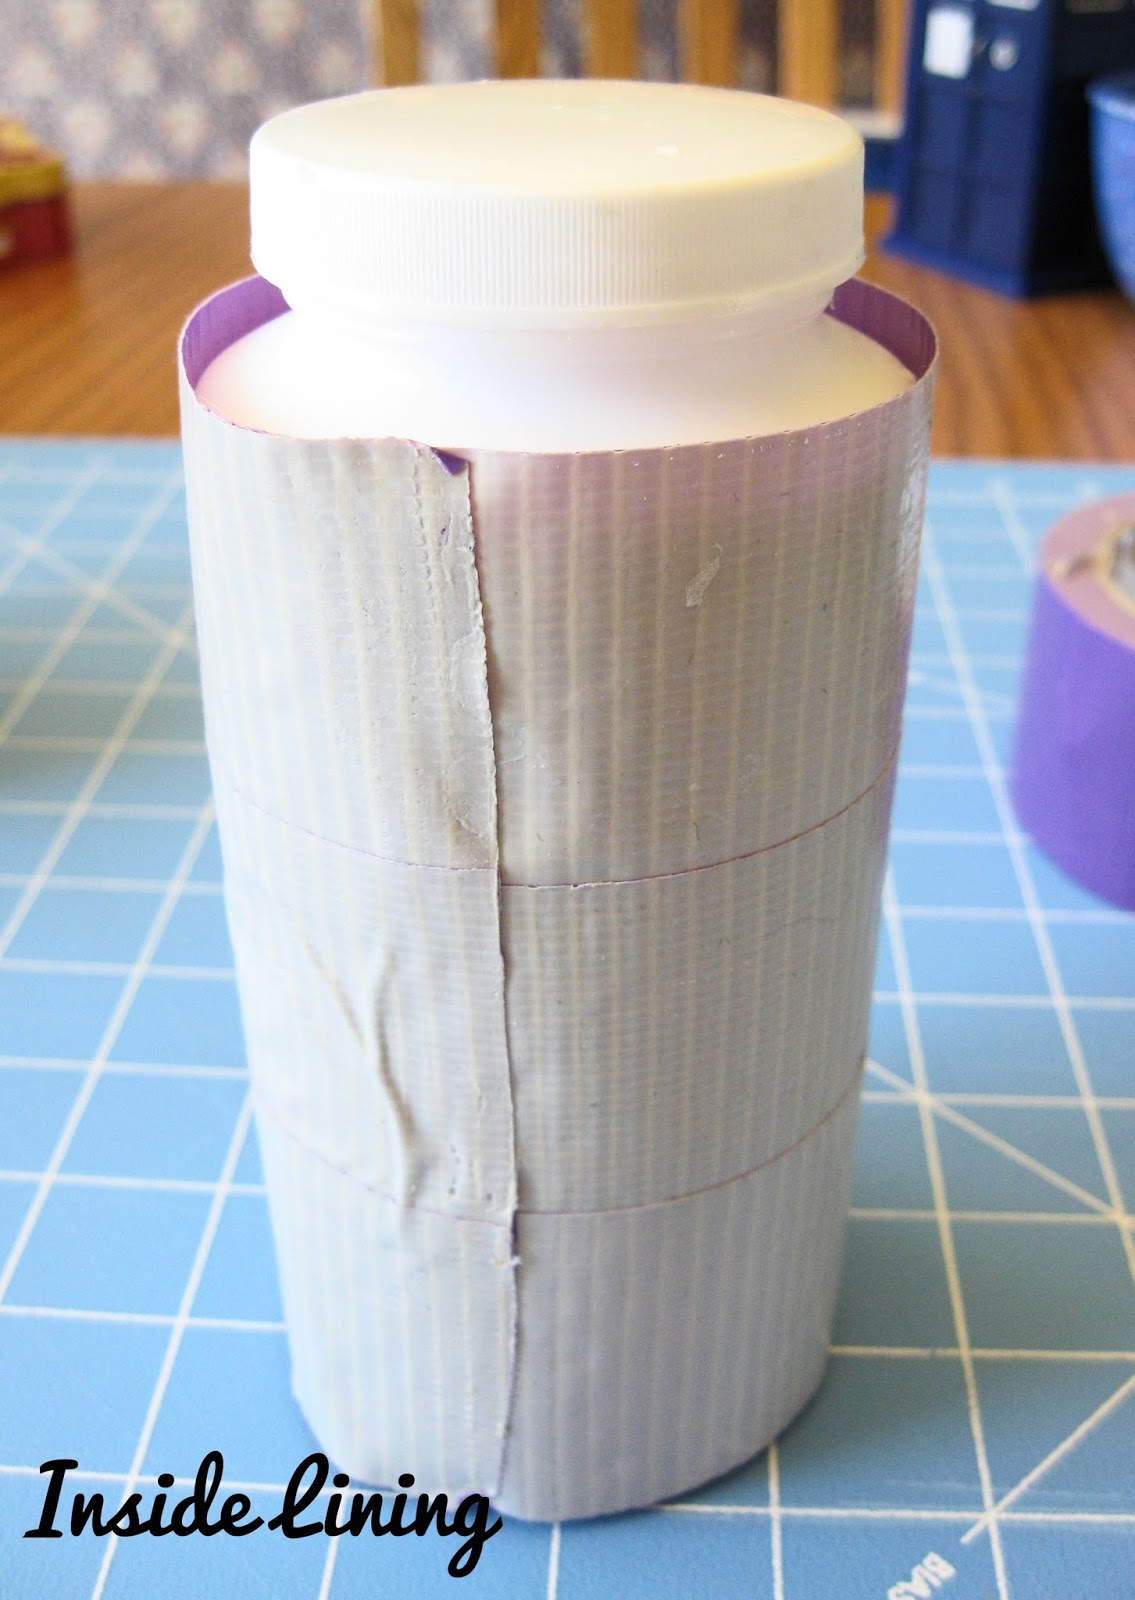 DIY Water Bottle Holder - How to make a duct tape water bottle holder!